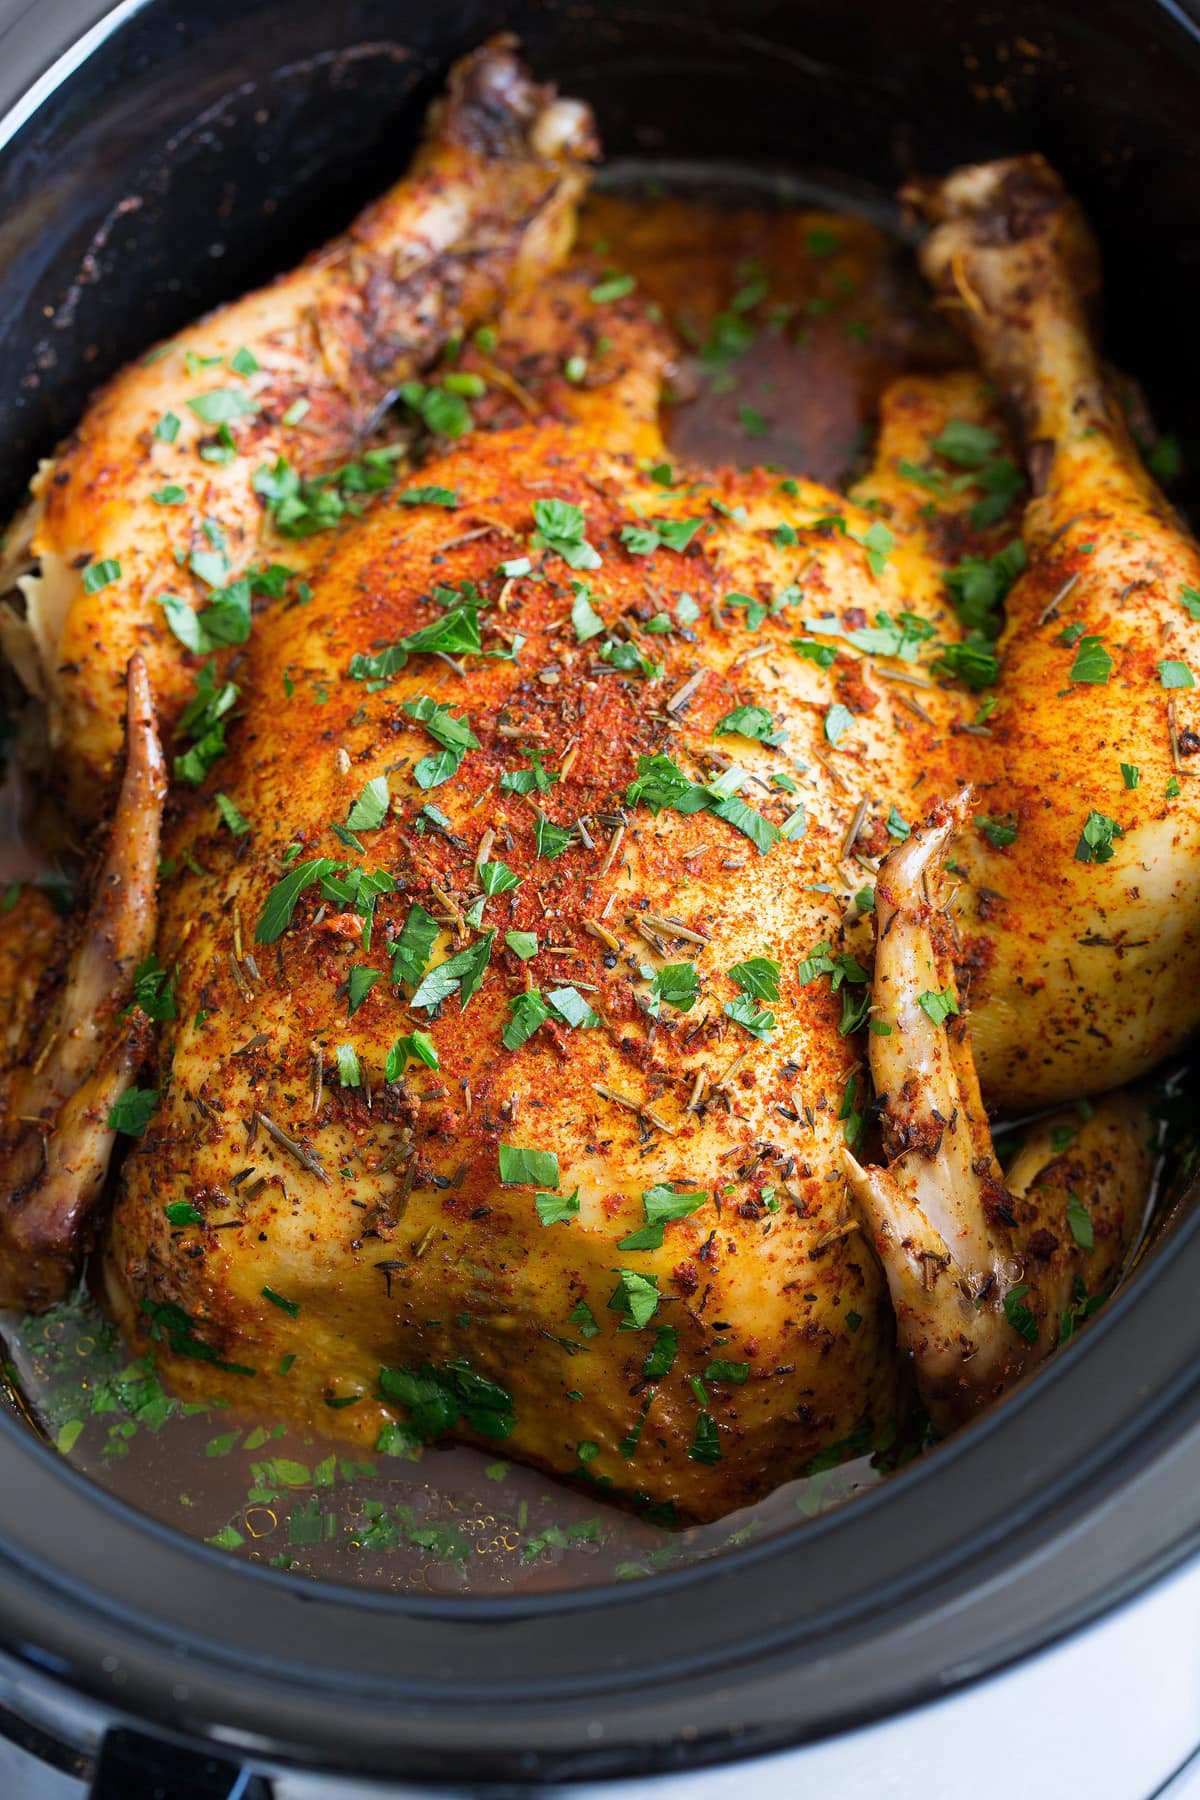 Whole Chicken Slow Cooker Best Of Slow Cooker Chicken whole Rotisserie Style Cooking Classy